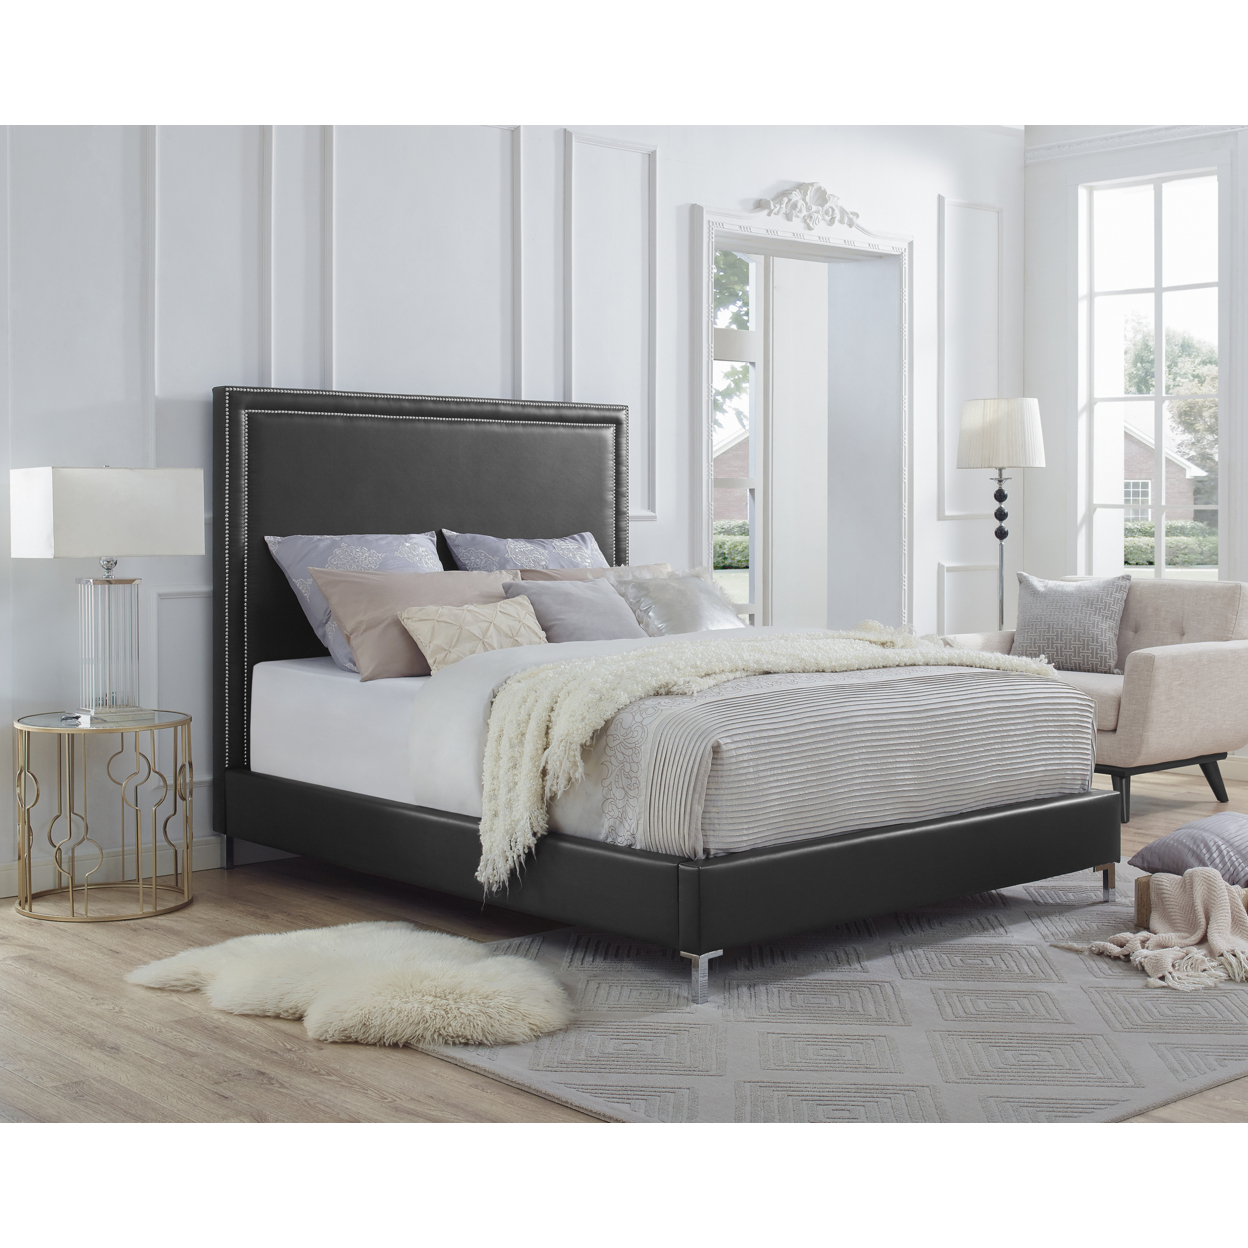 Valentina Leather PU Platform Bedframe-Nailhead Trim-King- Queen- Full- Twin Size-Inspired Home - Black, Queen